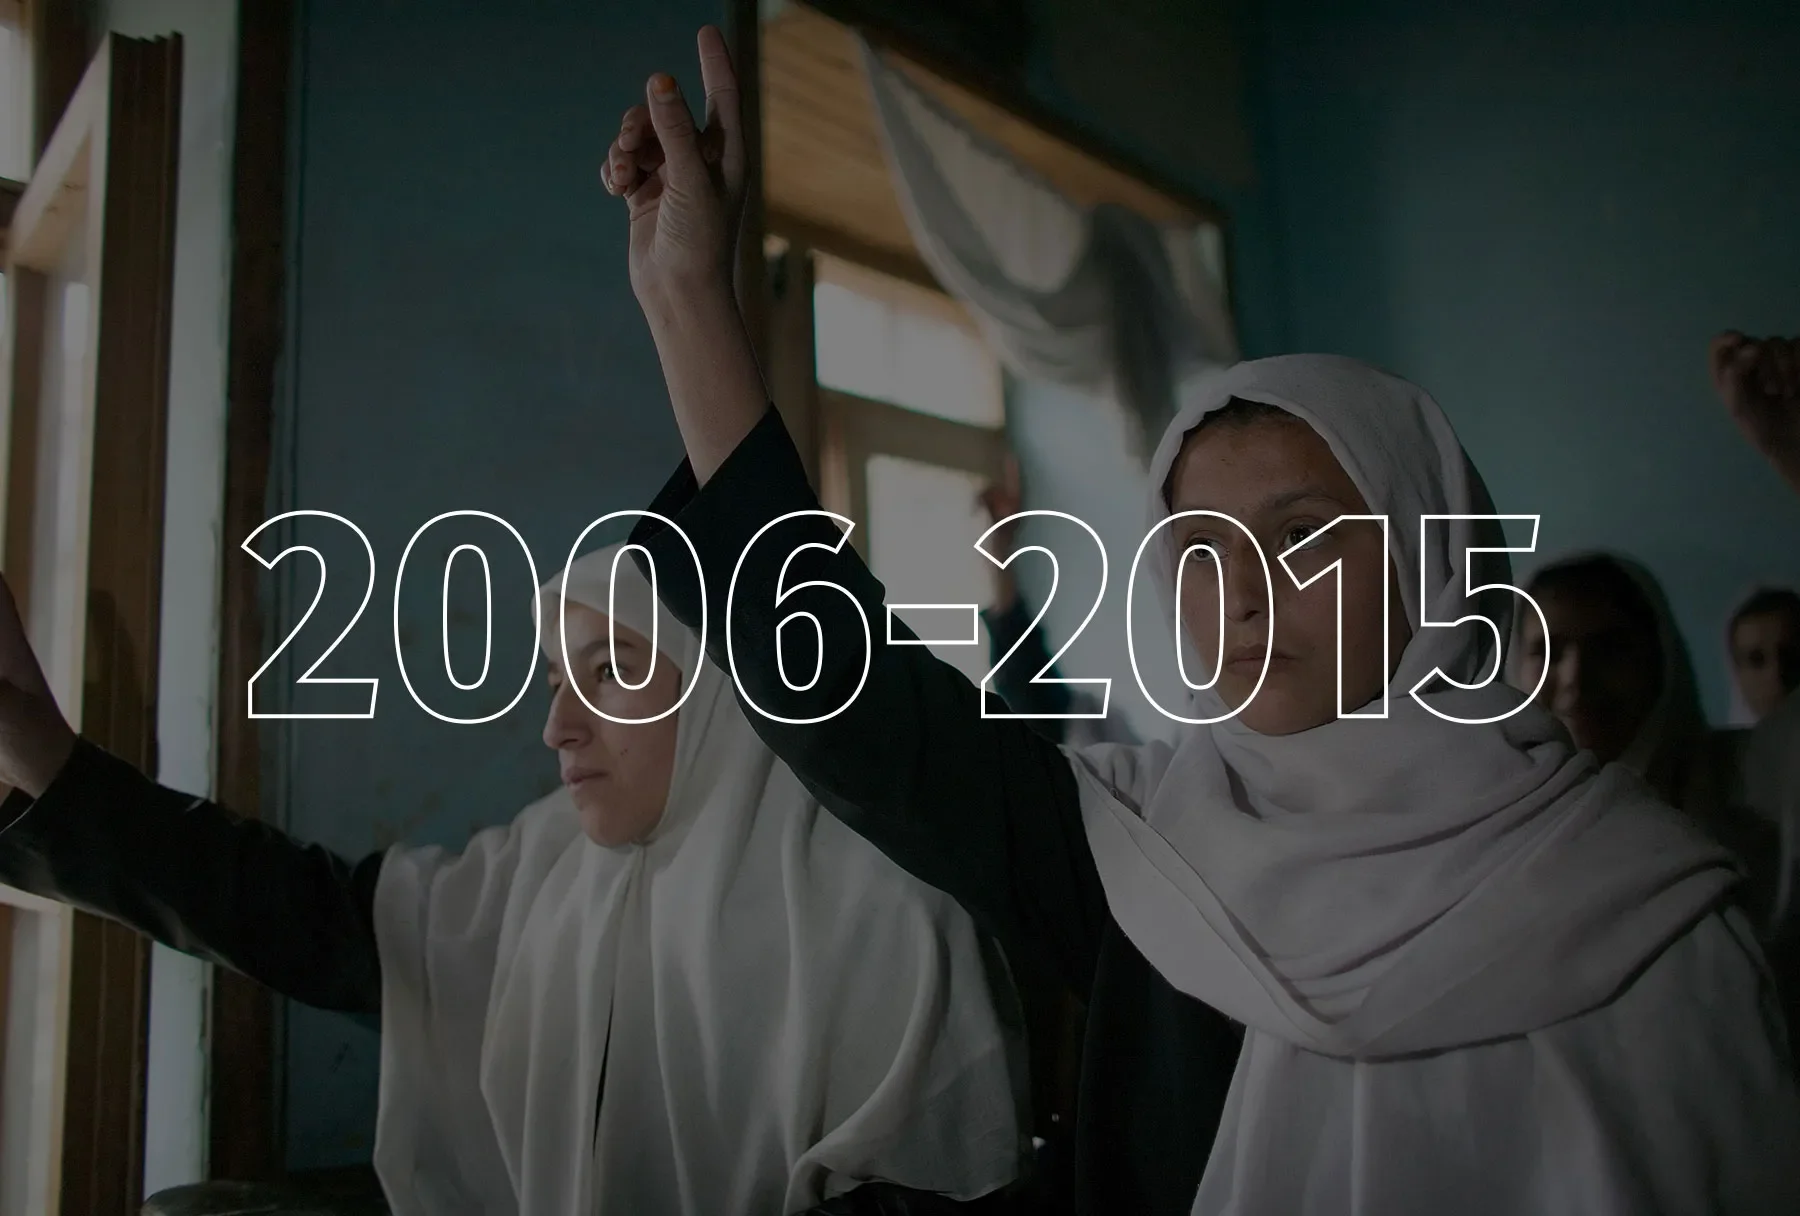 Two teenaged girls wearing dark long-sleeved shirts and white headscarves raise their right hands.